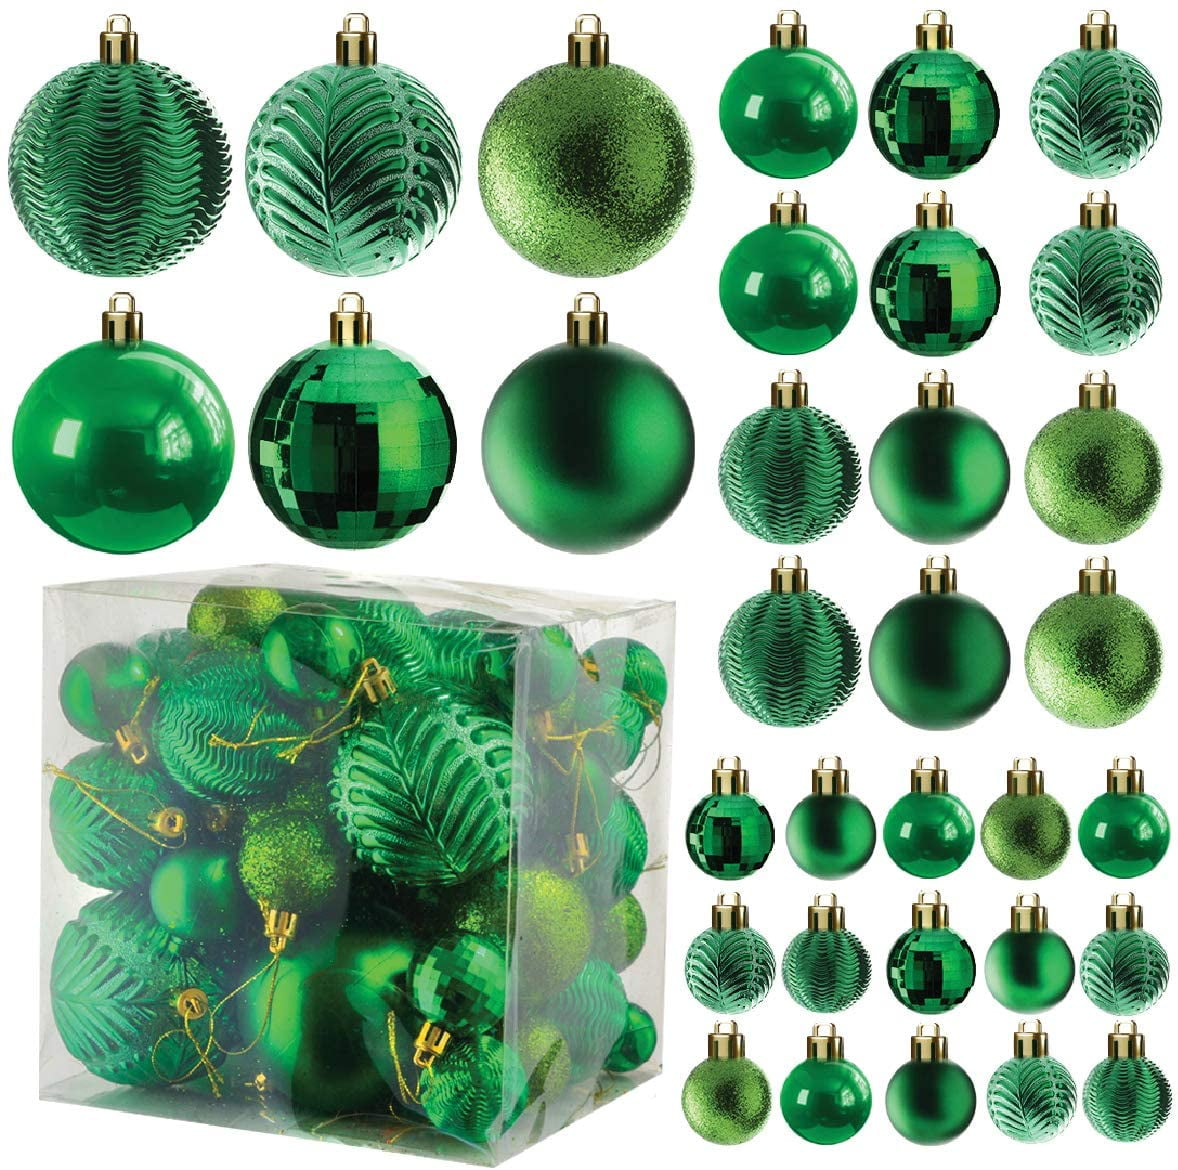 Northlight Blue & Green Peacock Ball & Figural Glass Ornaments, 3-Pack